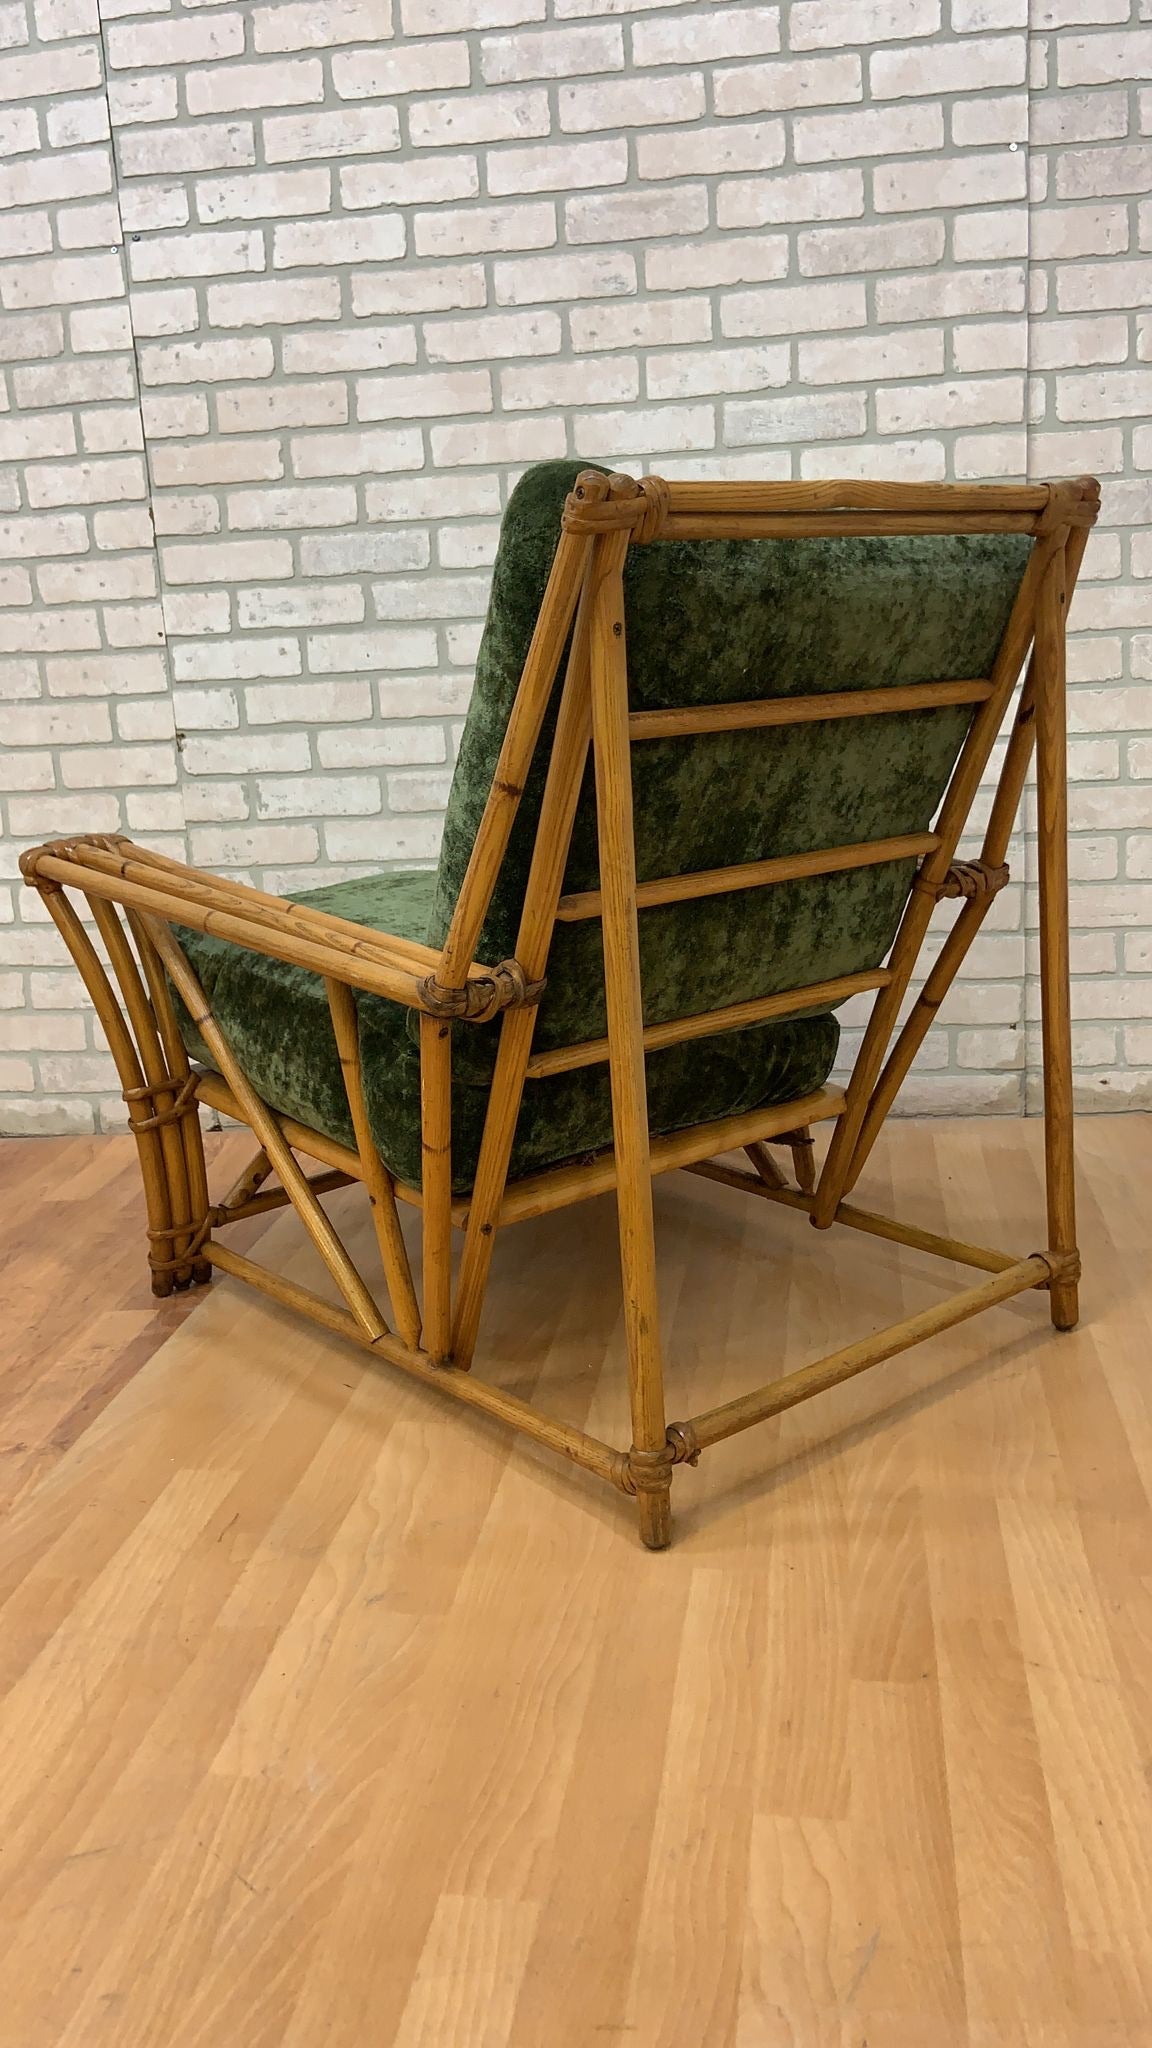 Vintage Mid Century Modern Rare Heywood Wakefield Ashcraft Rattan Lounge Chairs Newly Upholstered in a Deep Emerald Green Velvet - Set of 2